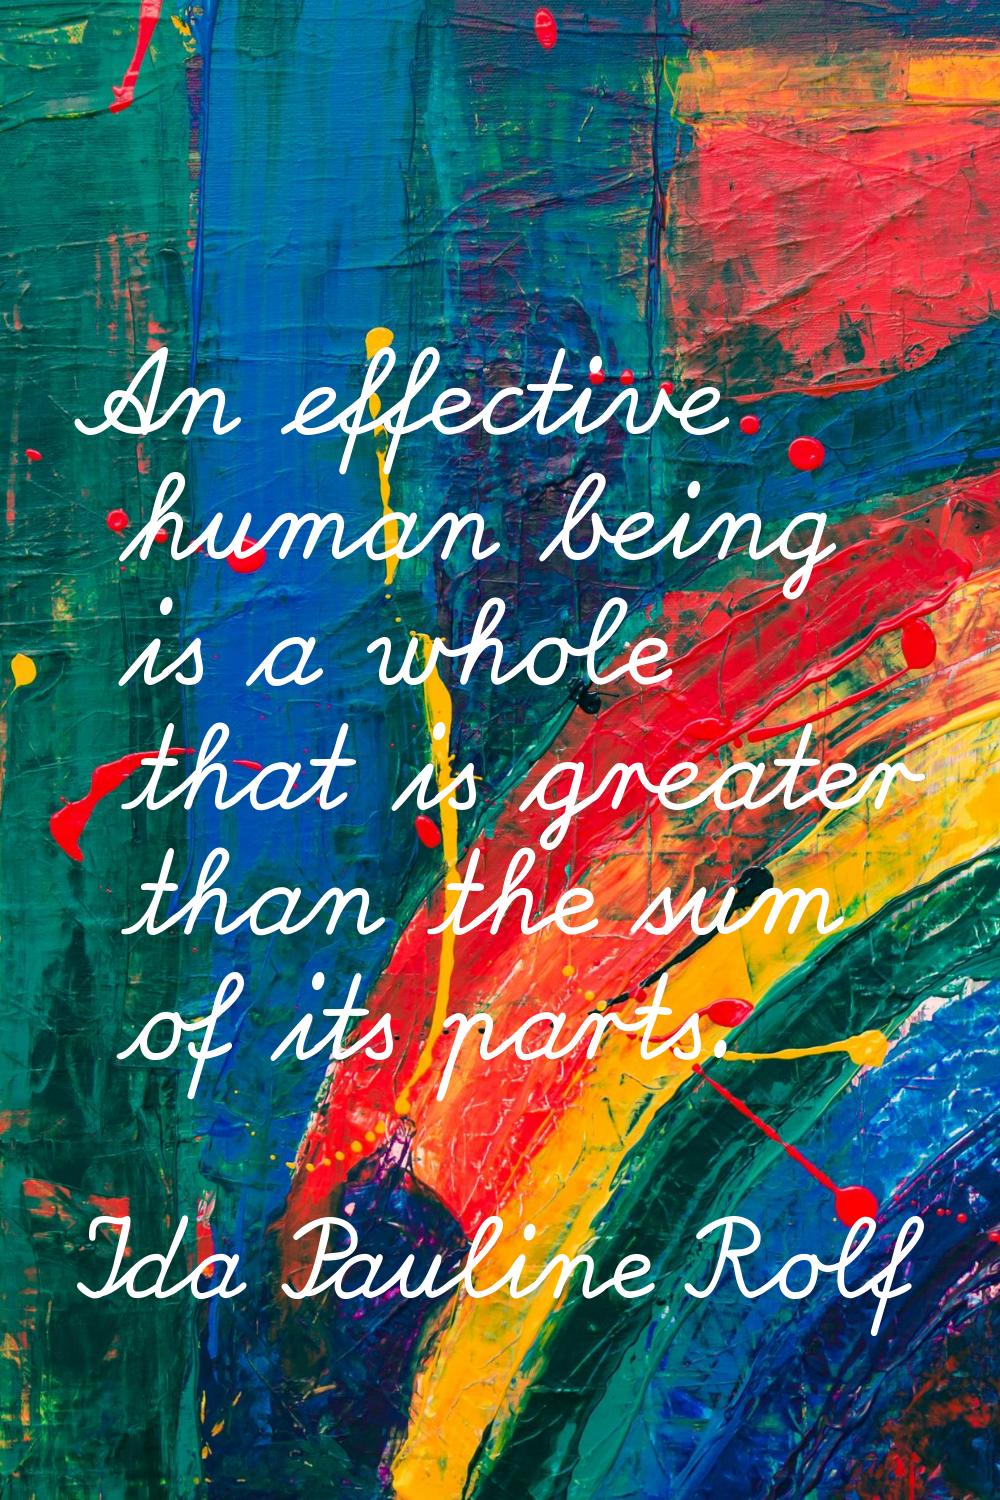 An effective human being is a whole that is greater than the sum of its parts.